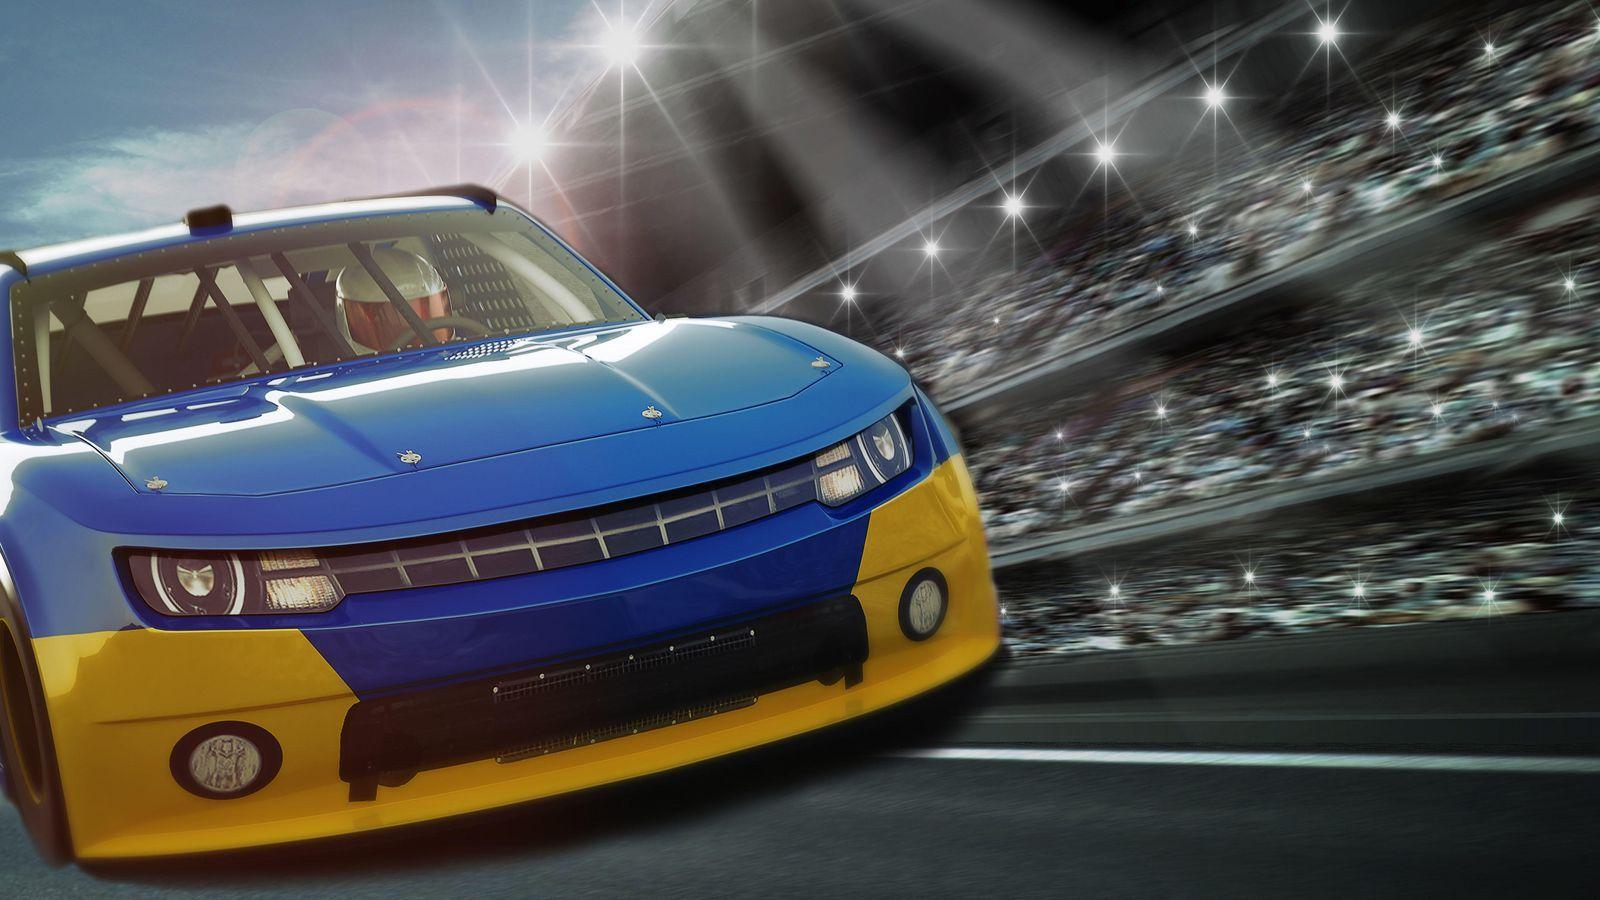 You could win* tickets to the big Daytona race!